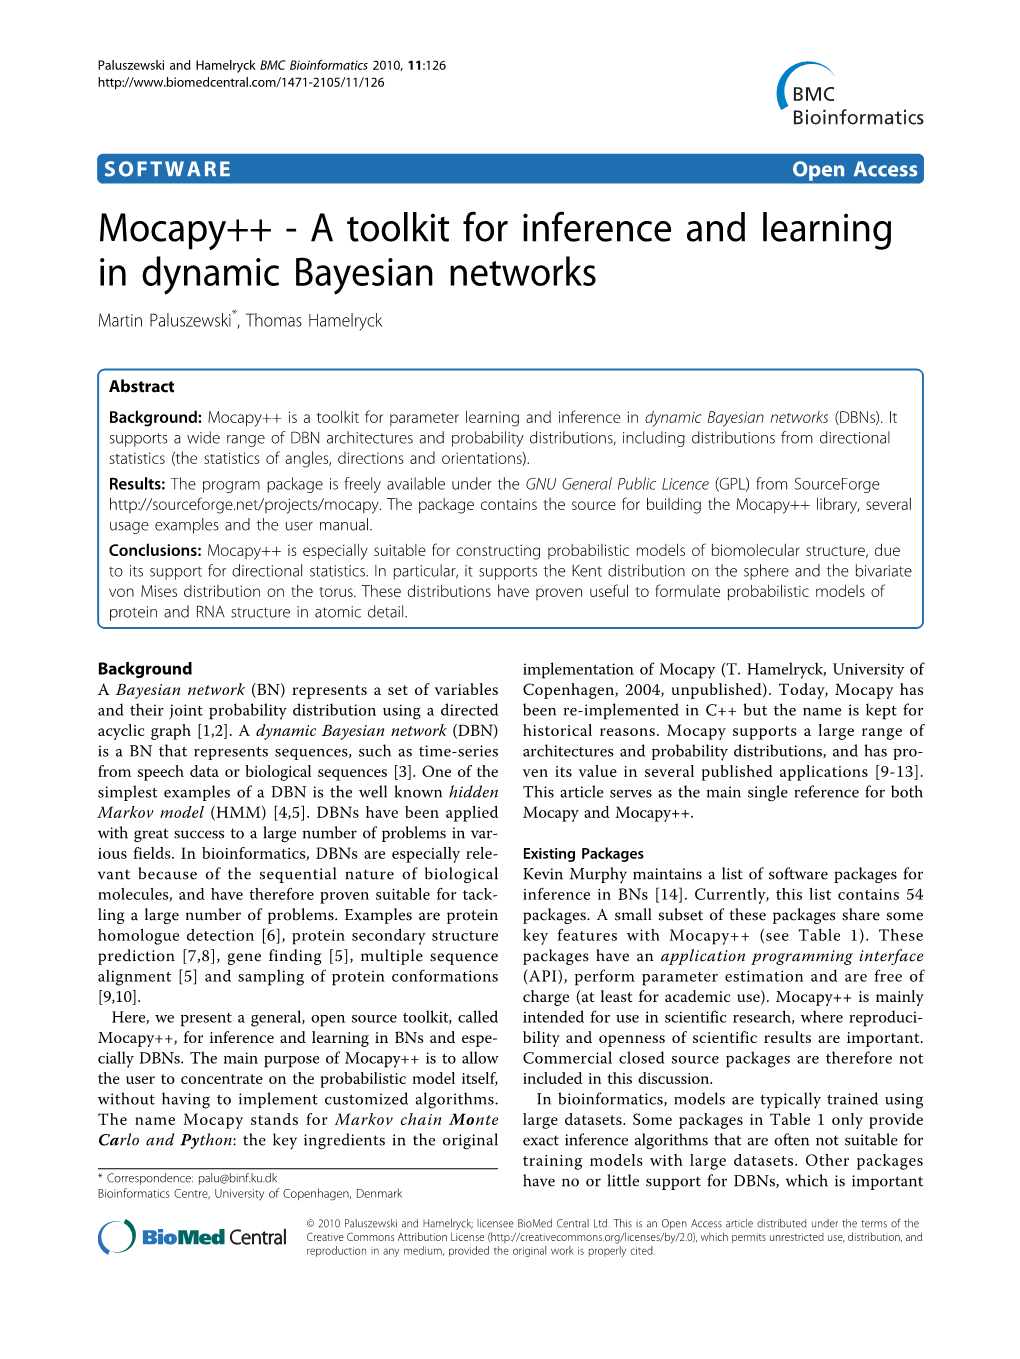 A Toolkit for Inference and Learning in Dynamic Bayesian Networks Martin Paluszewski*, Thomas Hamelryck